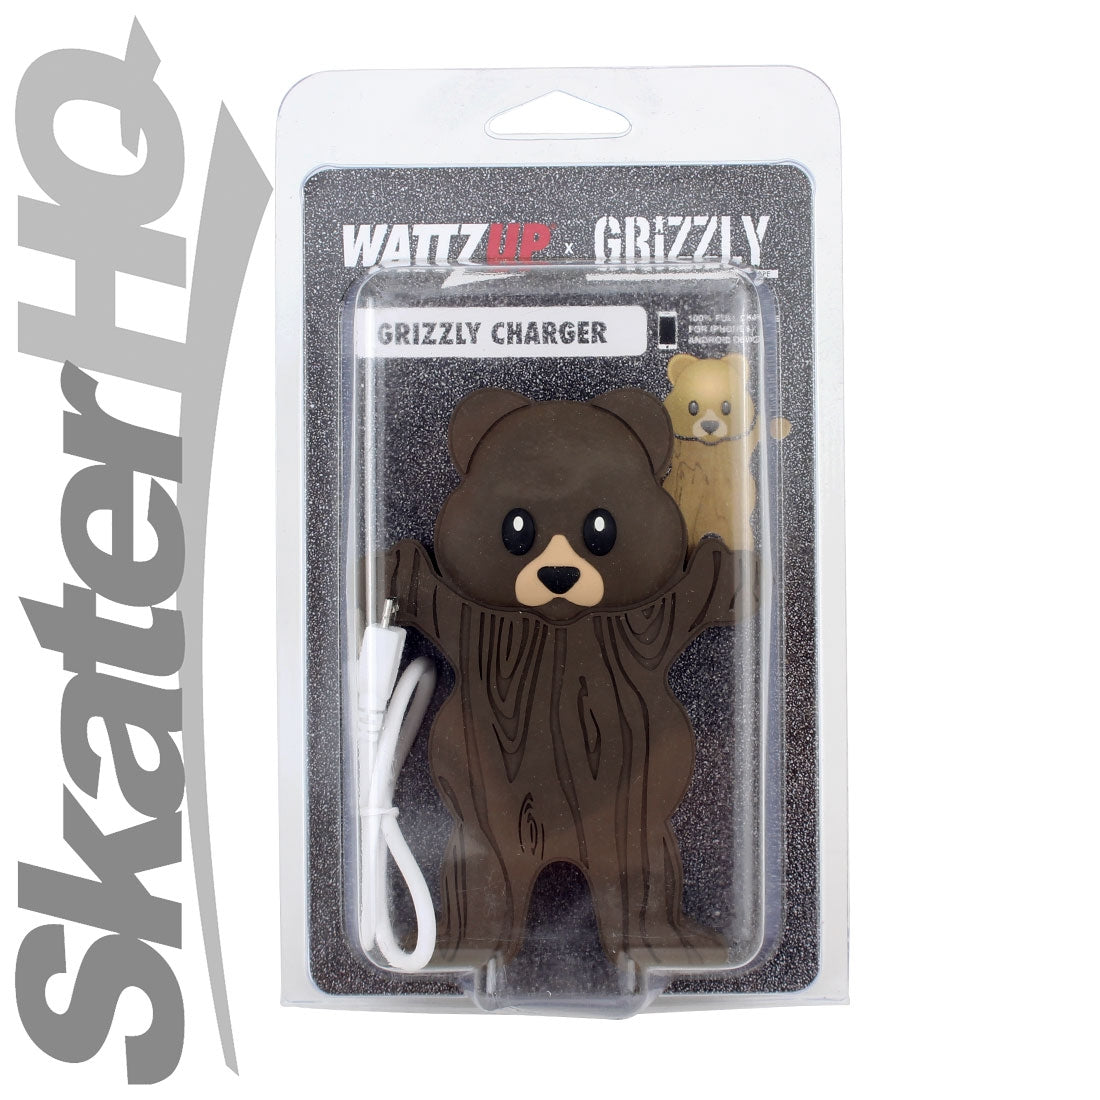 Grizzly X Wattzup Phone Charger Skateboard Accessories